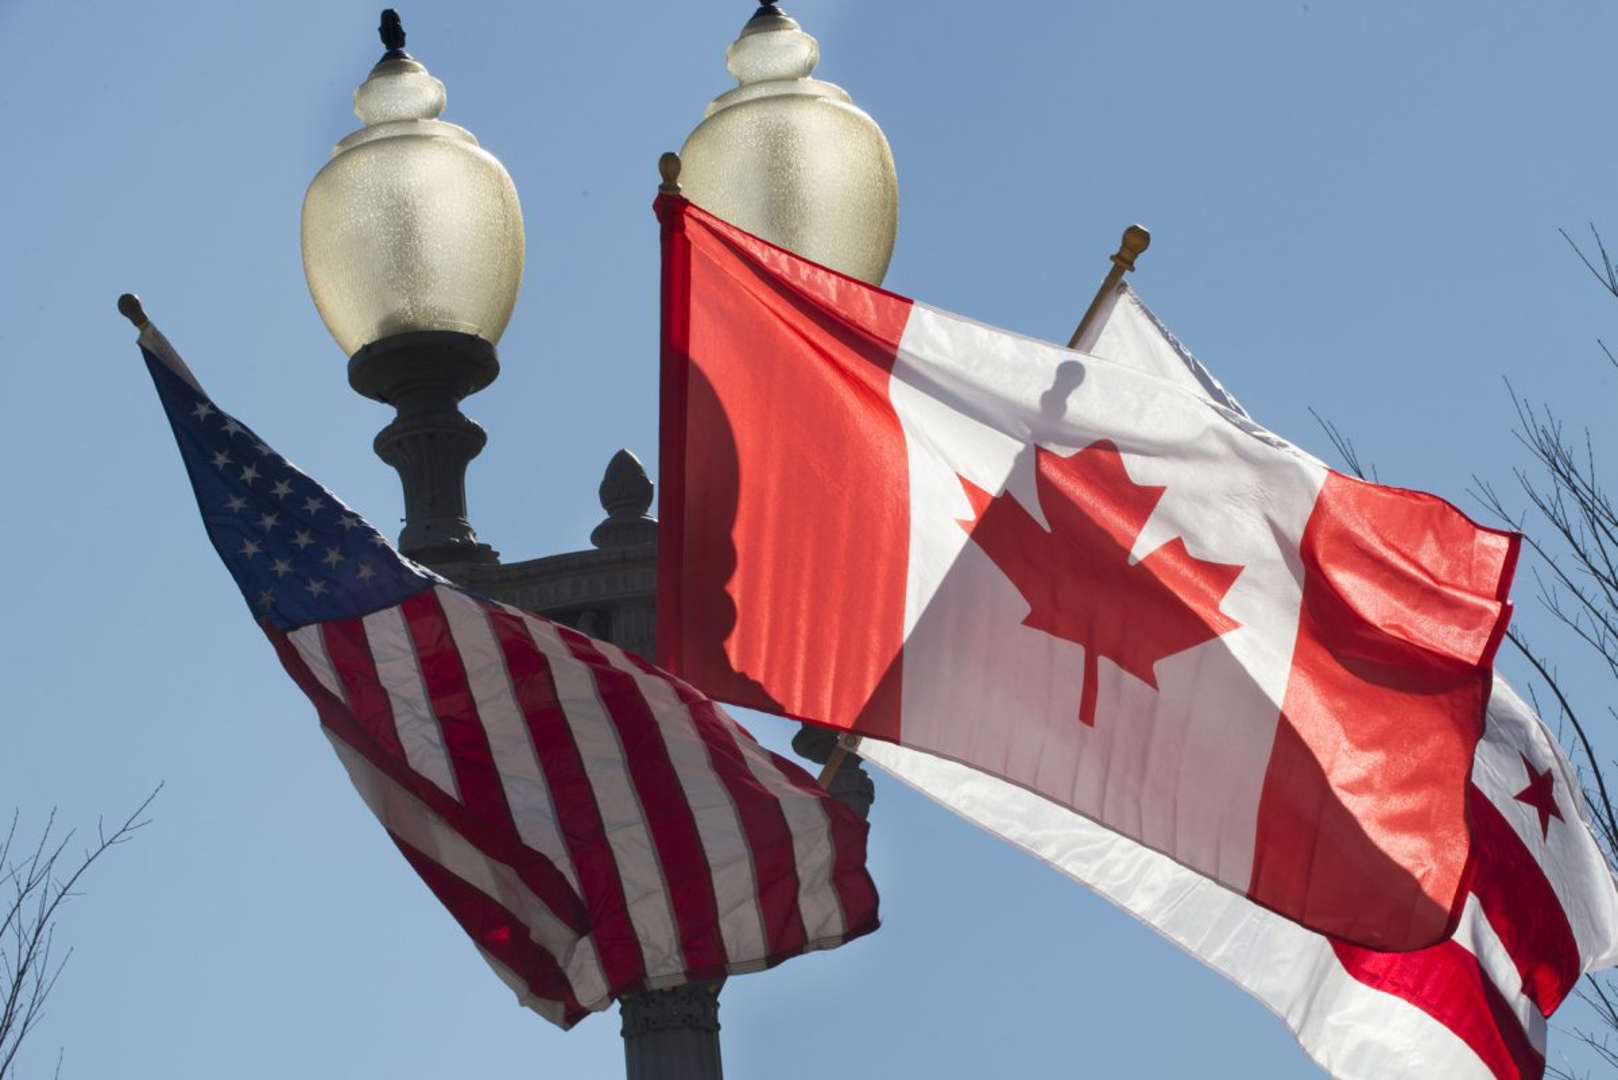 The Supreme Court of Canada on Friday upheld the Safe Third Country Agreement the country shares with the United States, declaring it is constitutional. File Photo by Pat Benic/UPI